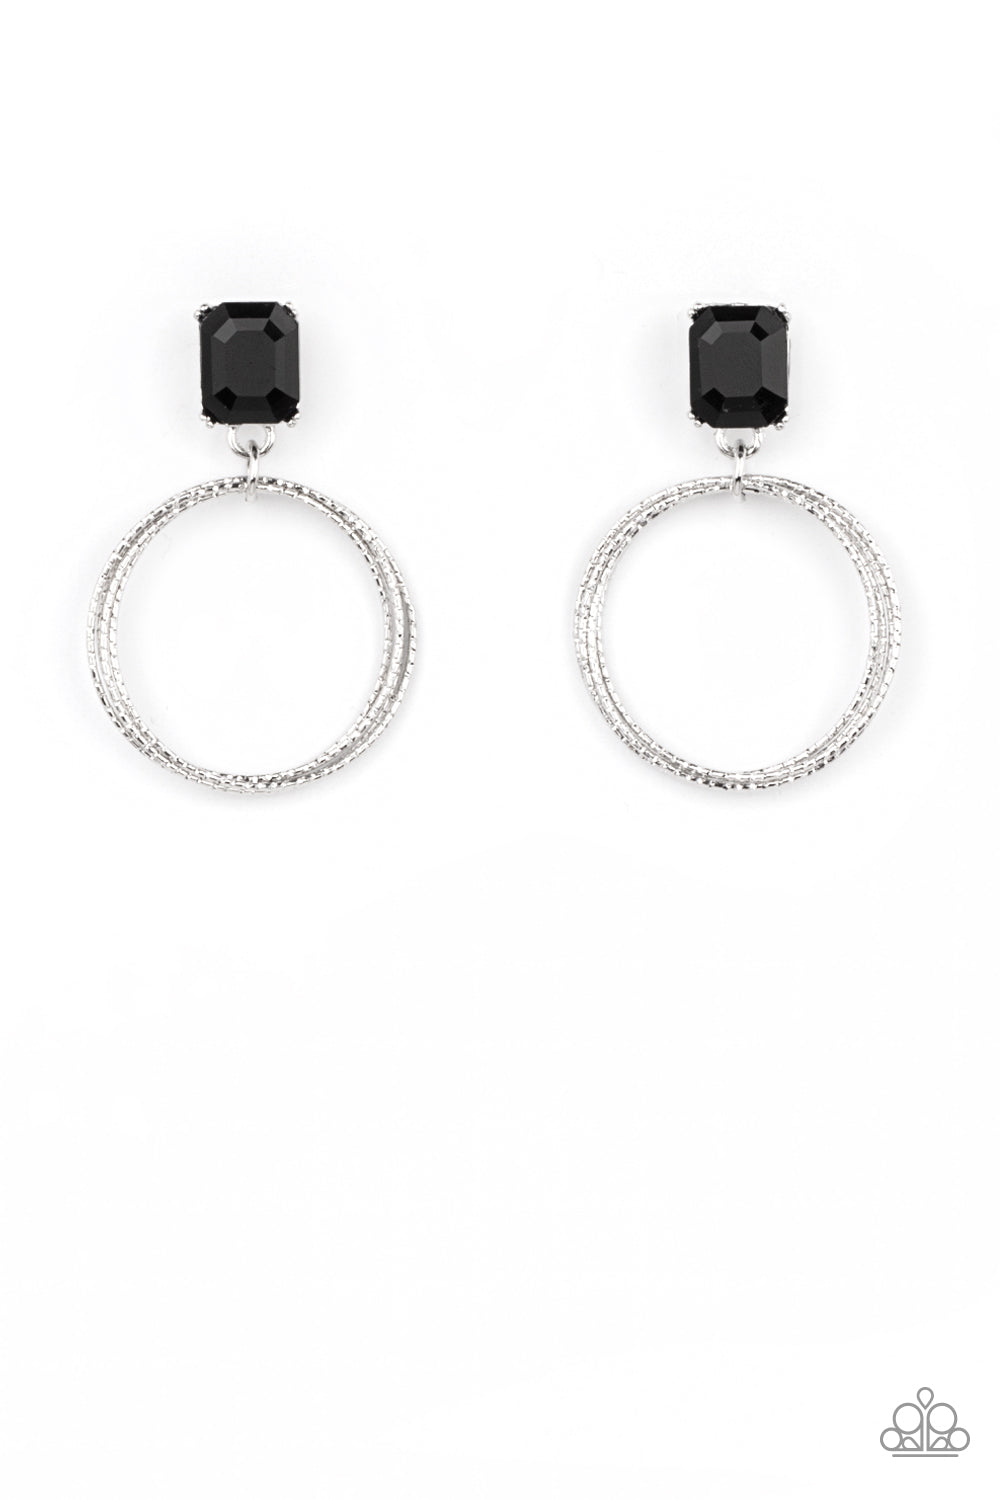 Paparazzi Accessories Prismatic Perfection - Black Earrings - Lady T Accessories